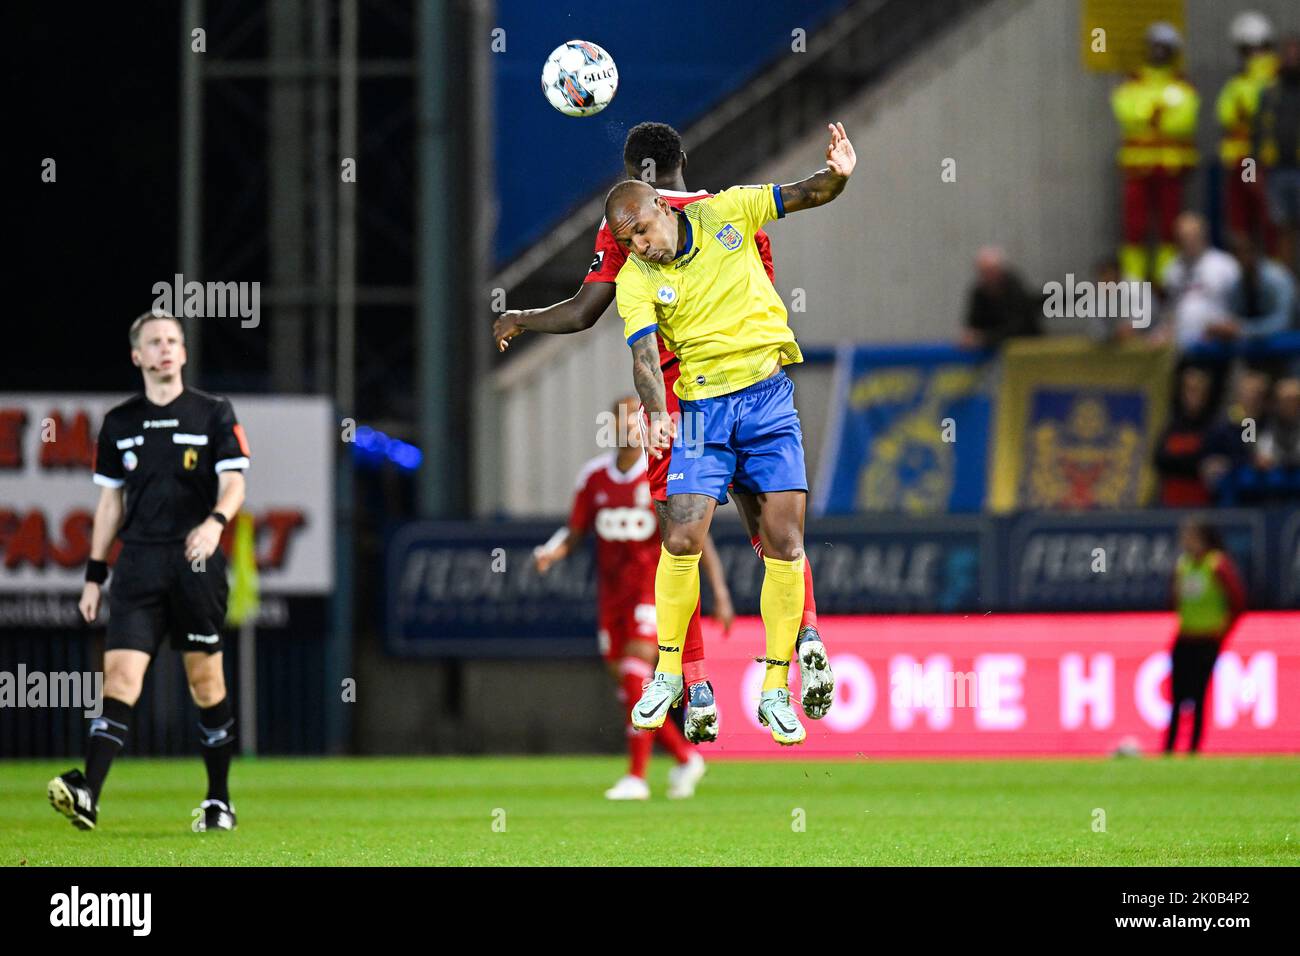 Beveren's Luiz Everton heads the ball during a soccer match between SK Beveren and SL16 (Standard Liege u23), Saturday 10 September 2022 in Beveren-Waas, on day 5 of the 2022-2023 'Challenger Pro League' 1B second division of the Belgian championship. BELGA PHOTO TOM GOYVAERTS Stock Photo